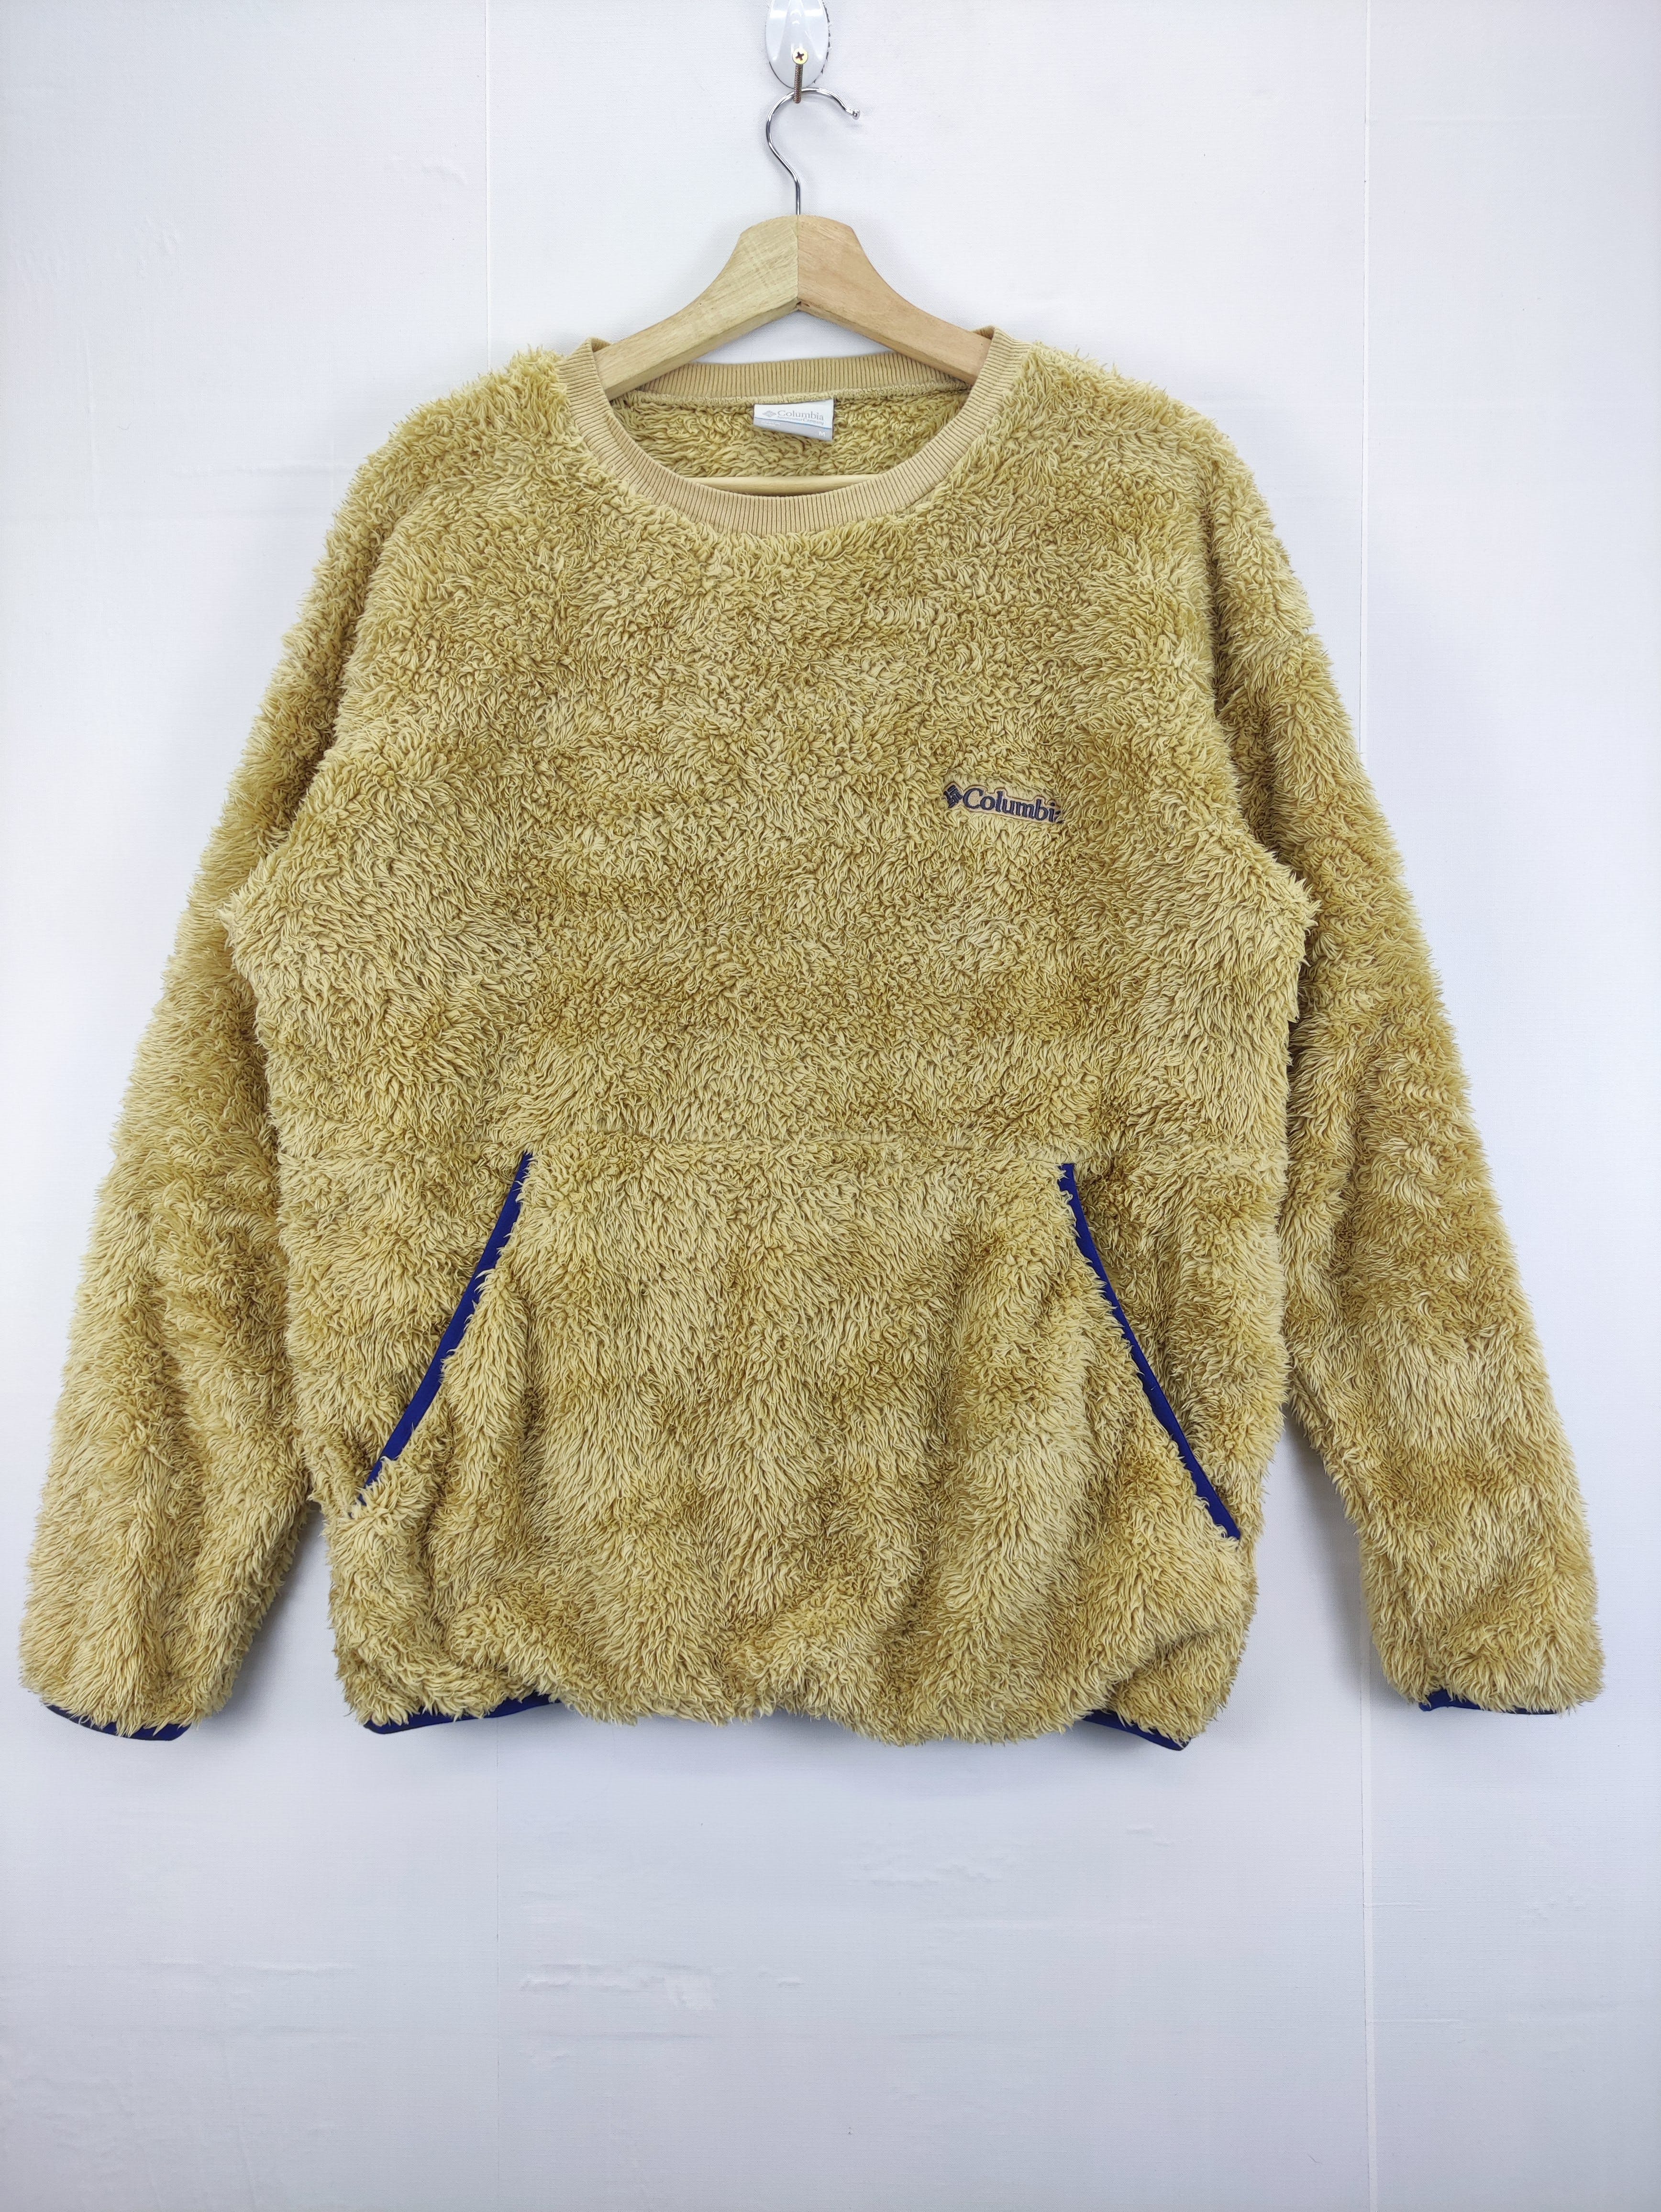 Outdoor Style Go Out! - Vintage Columbia Fleece Sweater - 1